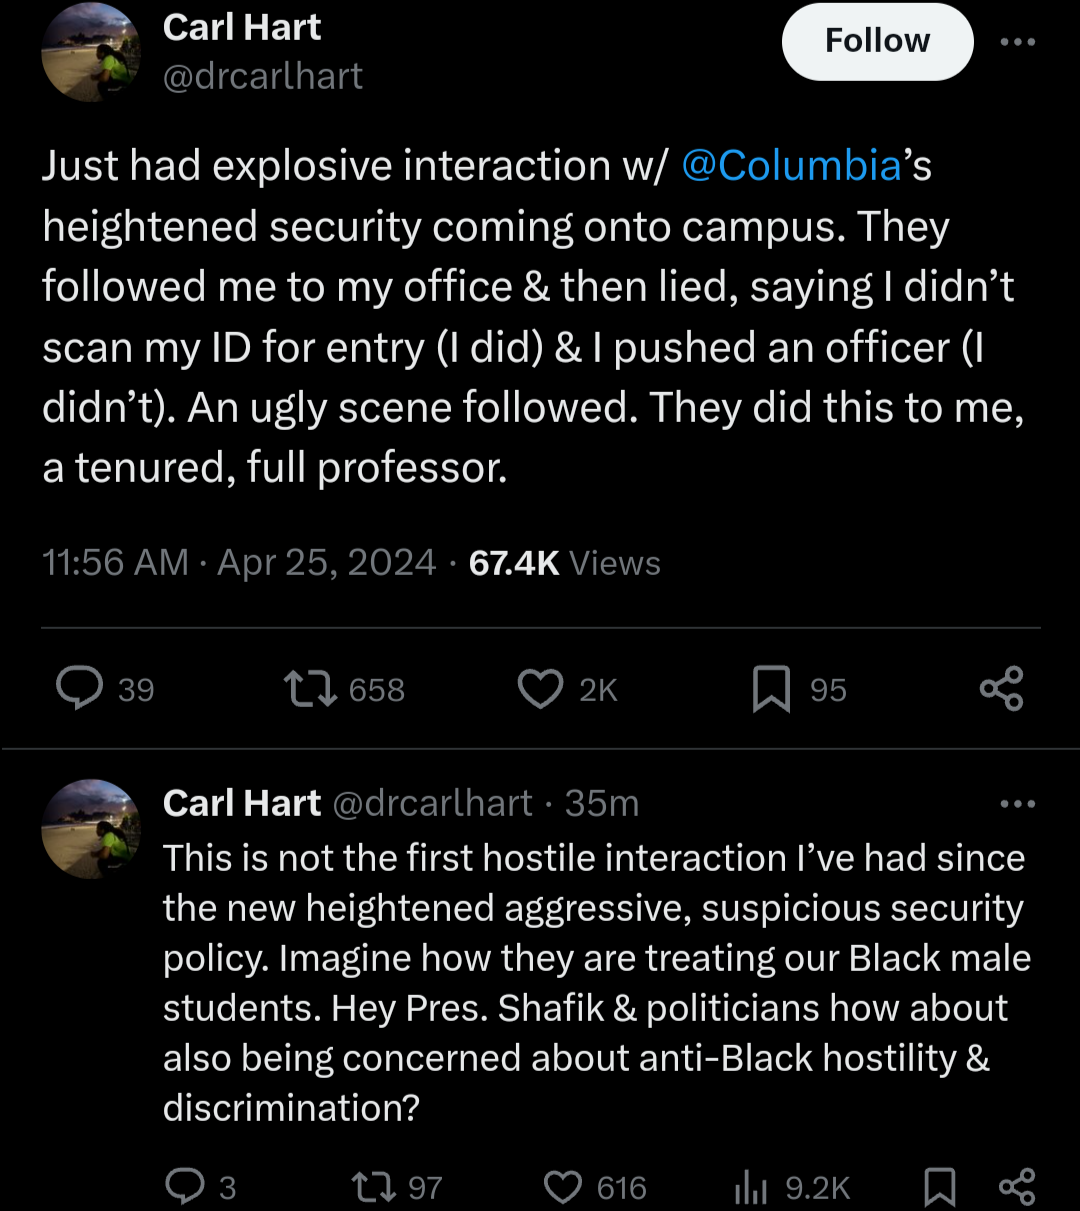 Just had explosive interaction w/ 

@Columbia

’s heightened security coming onto campus. They followed me to my office & then lied, saying I didn’t scan my ID for entry (I did) & I pushed an officer (I didn’t). An ugly scene followed. They did this to me, a tenured, full professor.

This is not the first hostile interaction I’ve had since the new heightened aggressive, suspicious security policy. Imagine how they are treating our Black male students. Hey Pres. Shafik & politicians how about also being concerned about anti-Black hostility & discrimination?